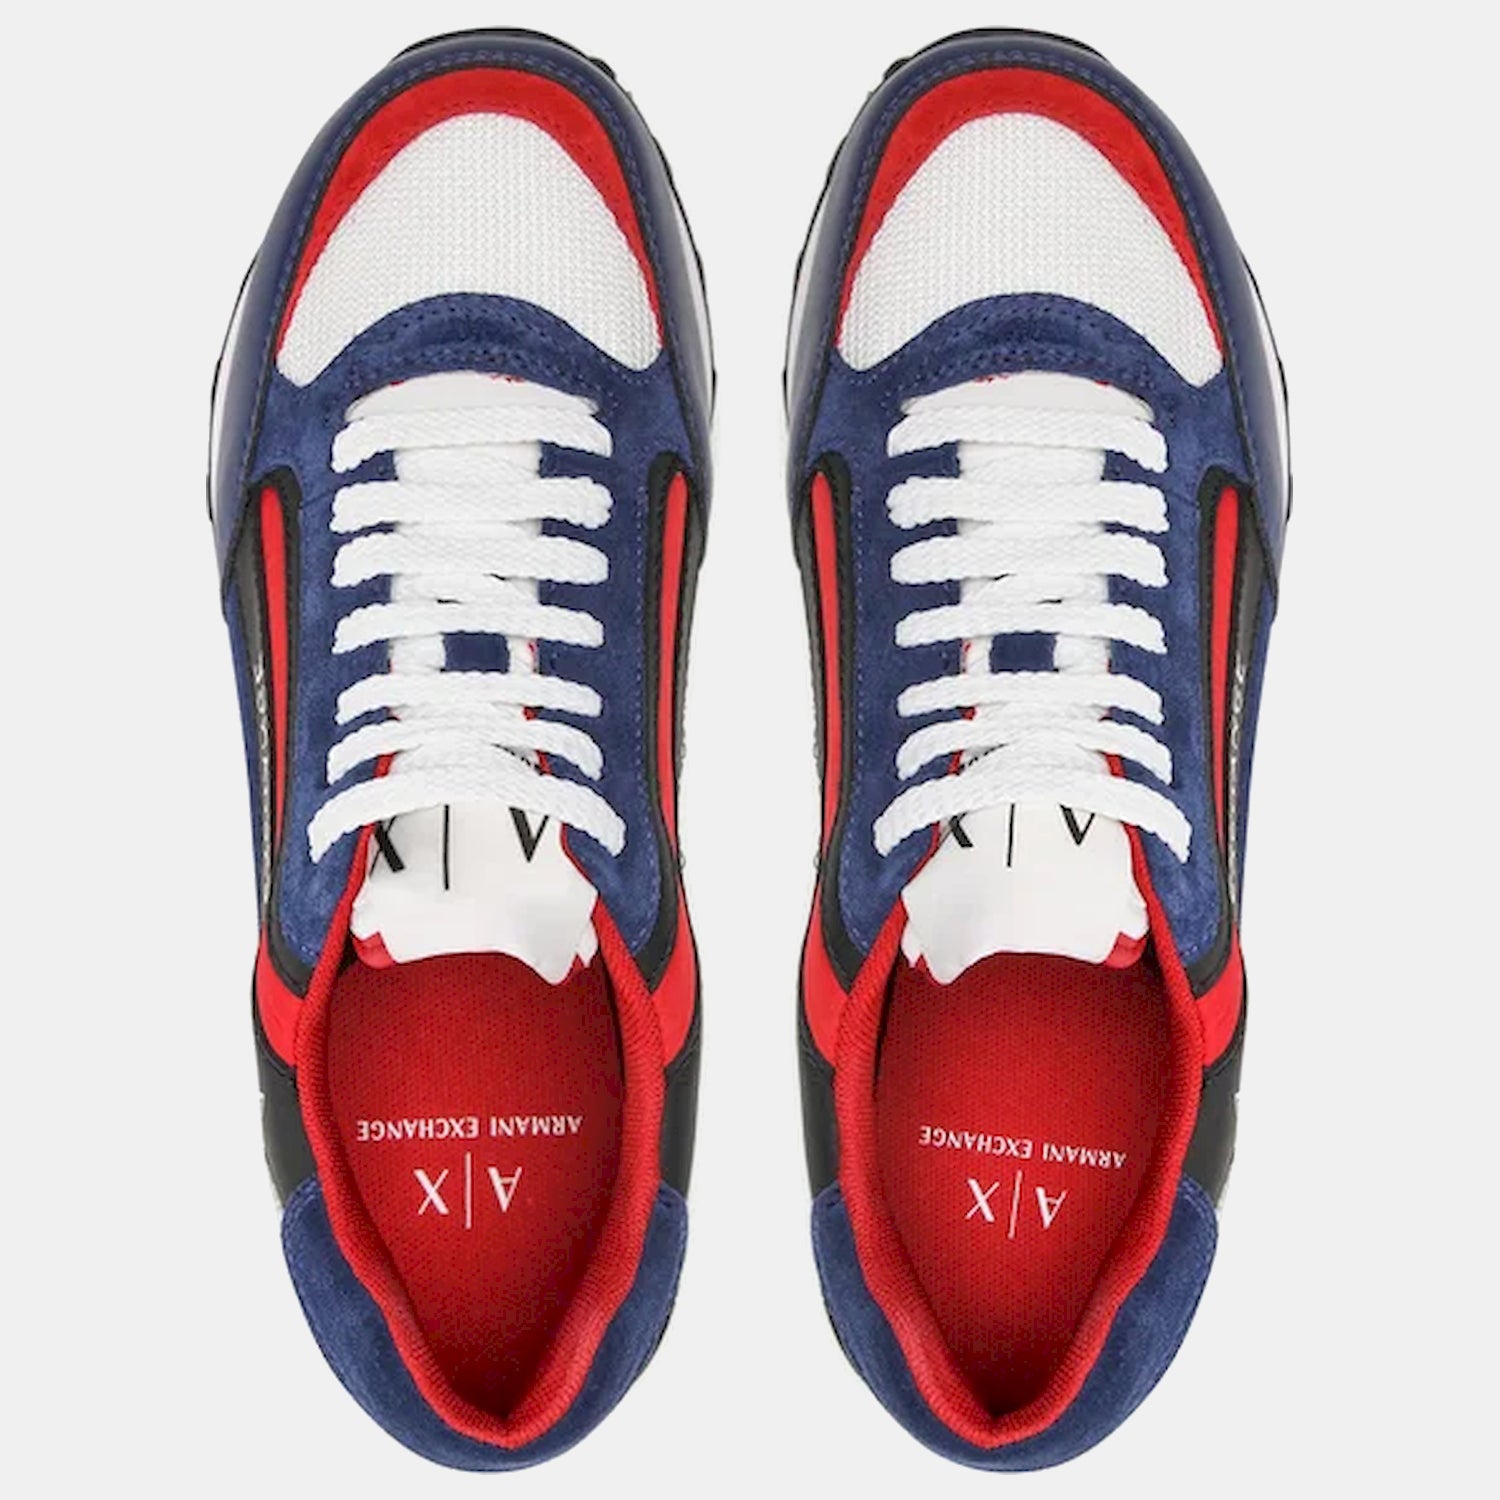 Armani Exchange Sapatilhas Sneakers Shoes Xux101 Xv294 Navy Red Navy Vermelho_shot3